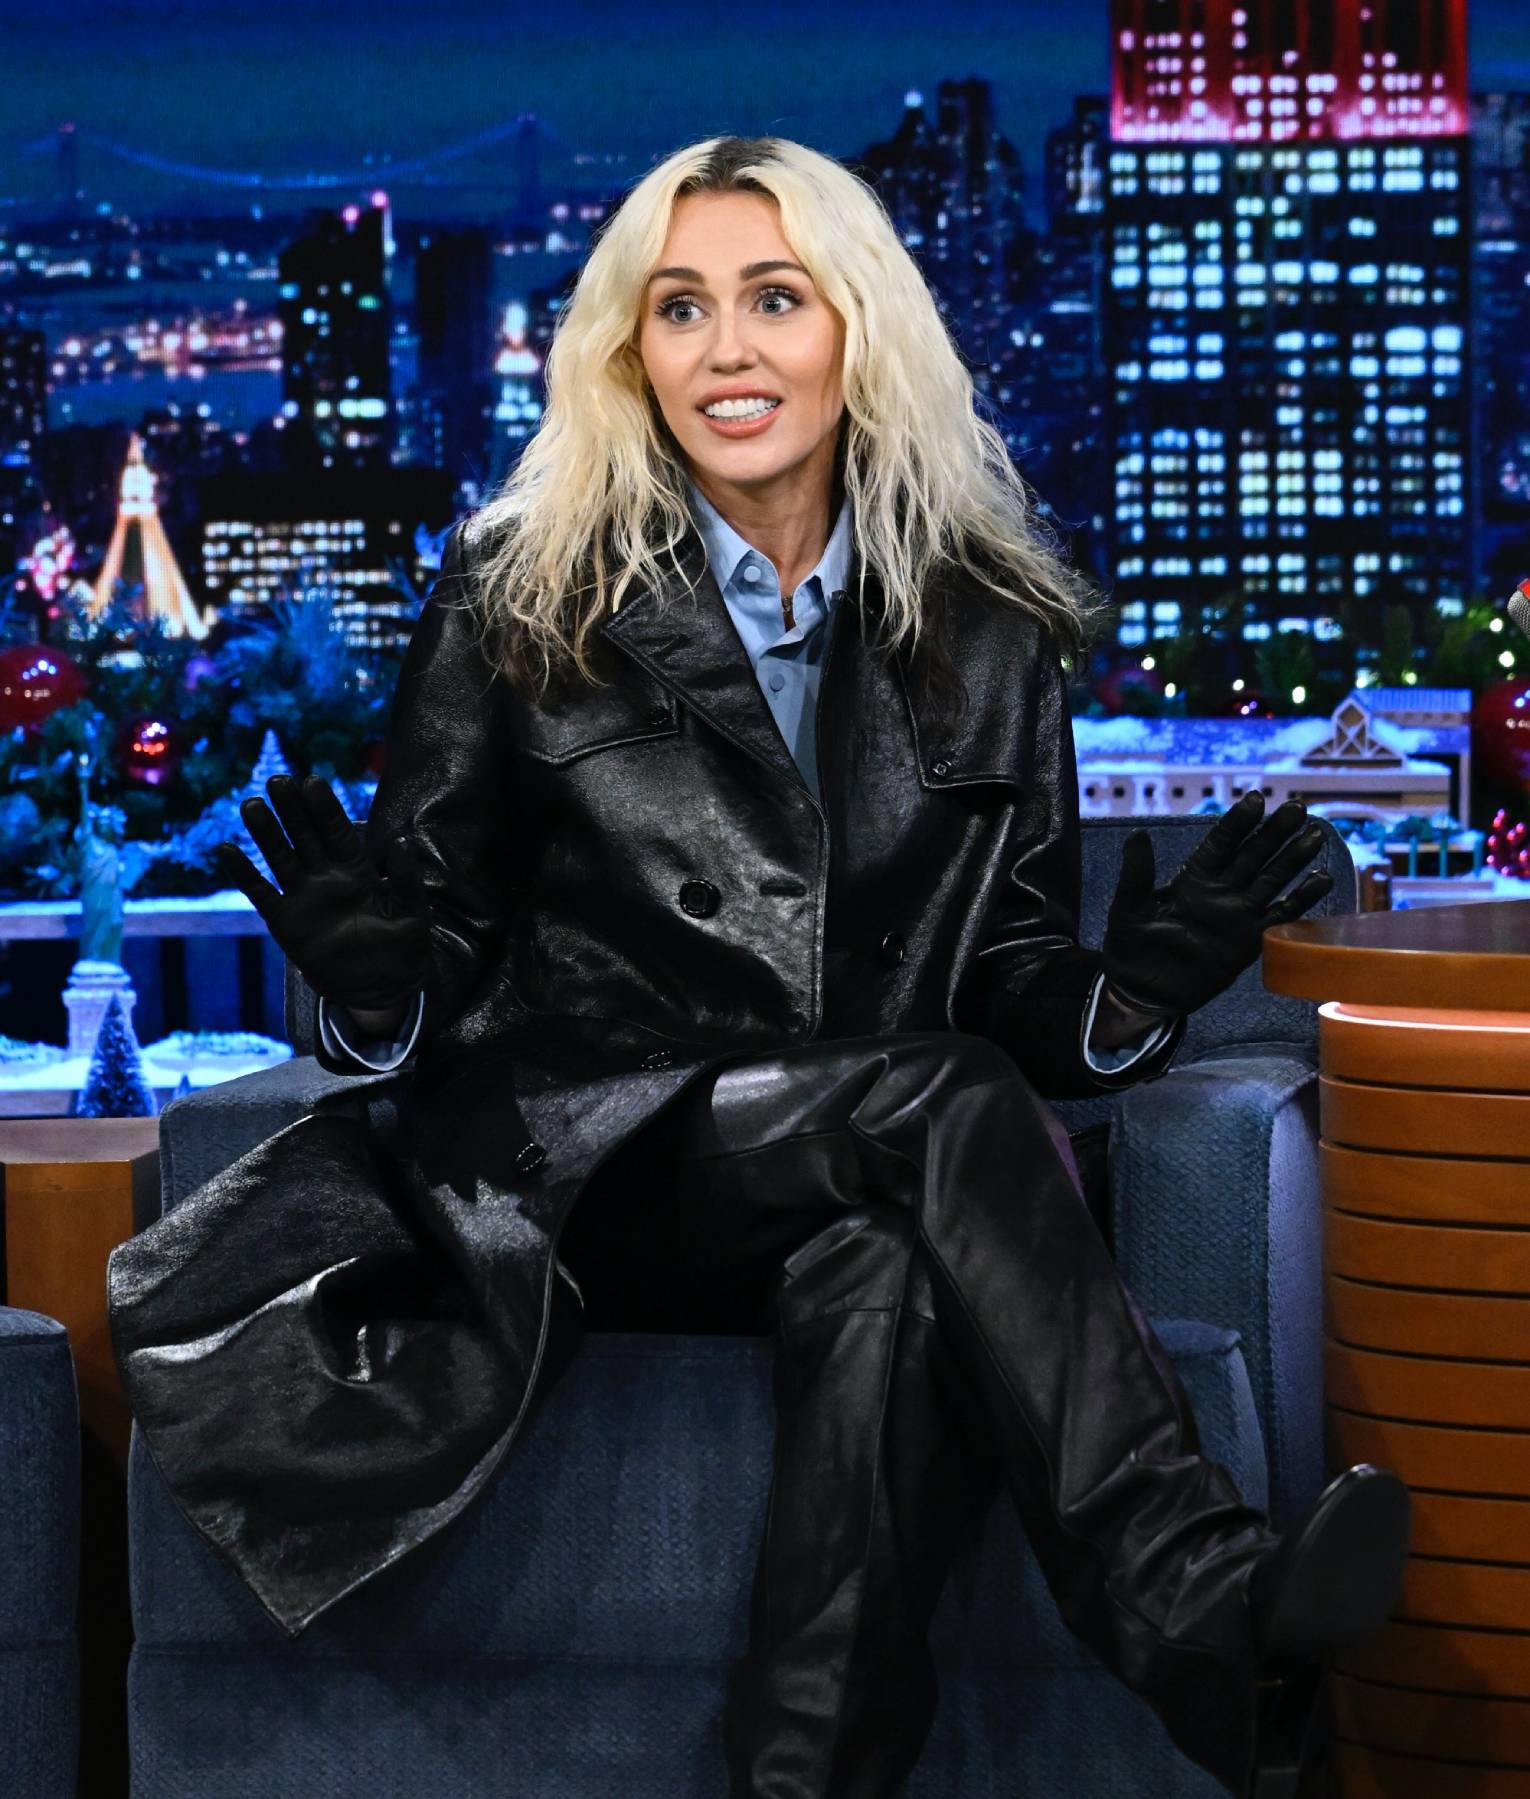 Miley Cyrus Black Leather Trench Coat 8